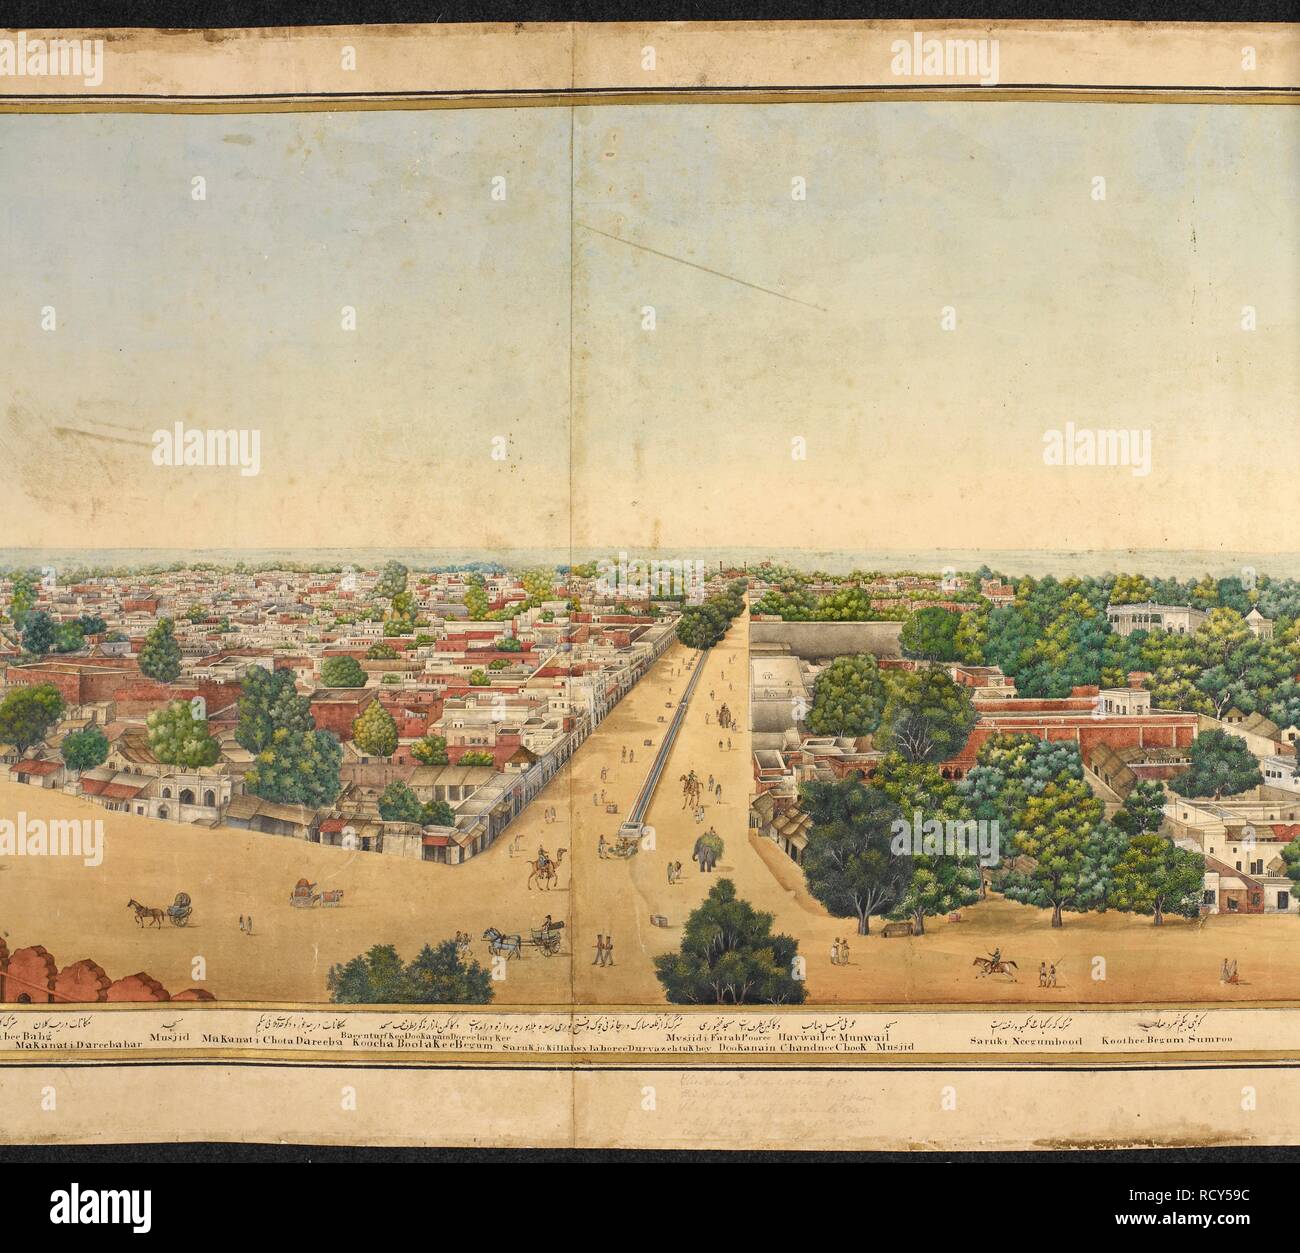 Section of a panorama of Delhi. A panorama of Delhi. 25th November 1846. A panorama of Delhi taken through almost 360Â° from the top of the Lahore Gate of the Red Fort, Delhi. Water-colour and body-colour with gold; 665 by 4908 mm (530 by 4828 mm within frame) on five sheets of paper, glued together to form a scroll. Source: Add.Or.4126. Language: Persian, English and Urdu. Author: Khan, Mazhar 'Ali. Stock Photo